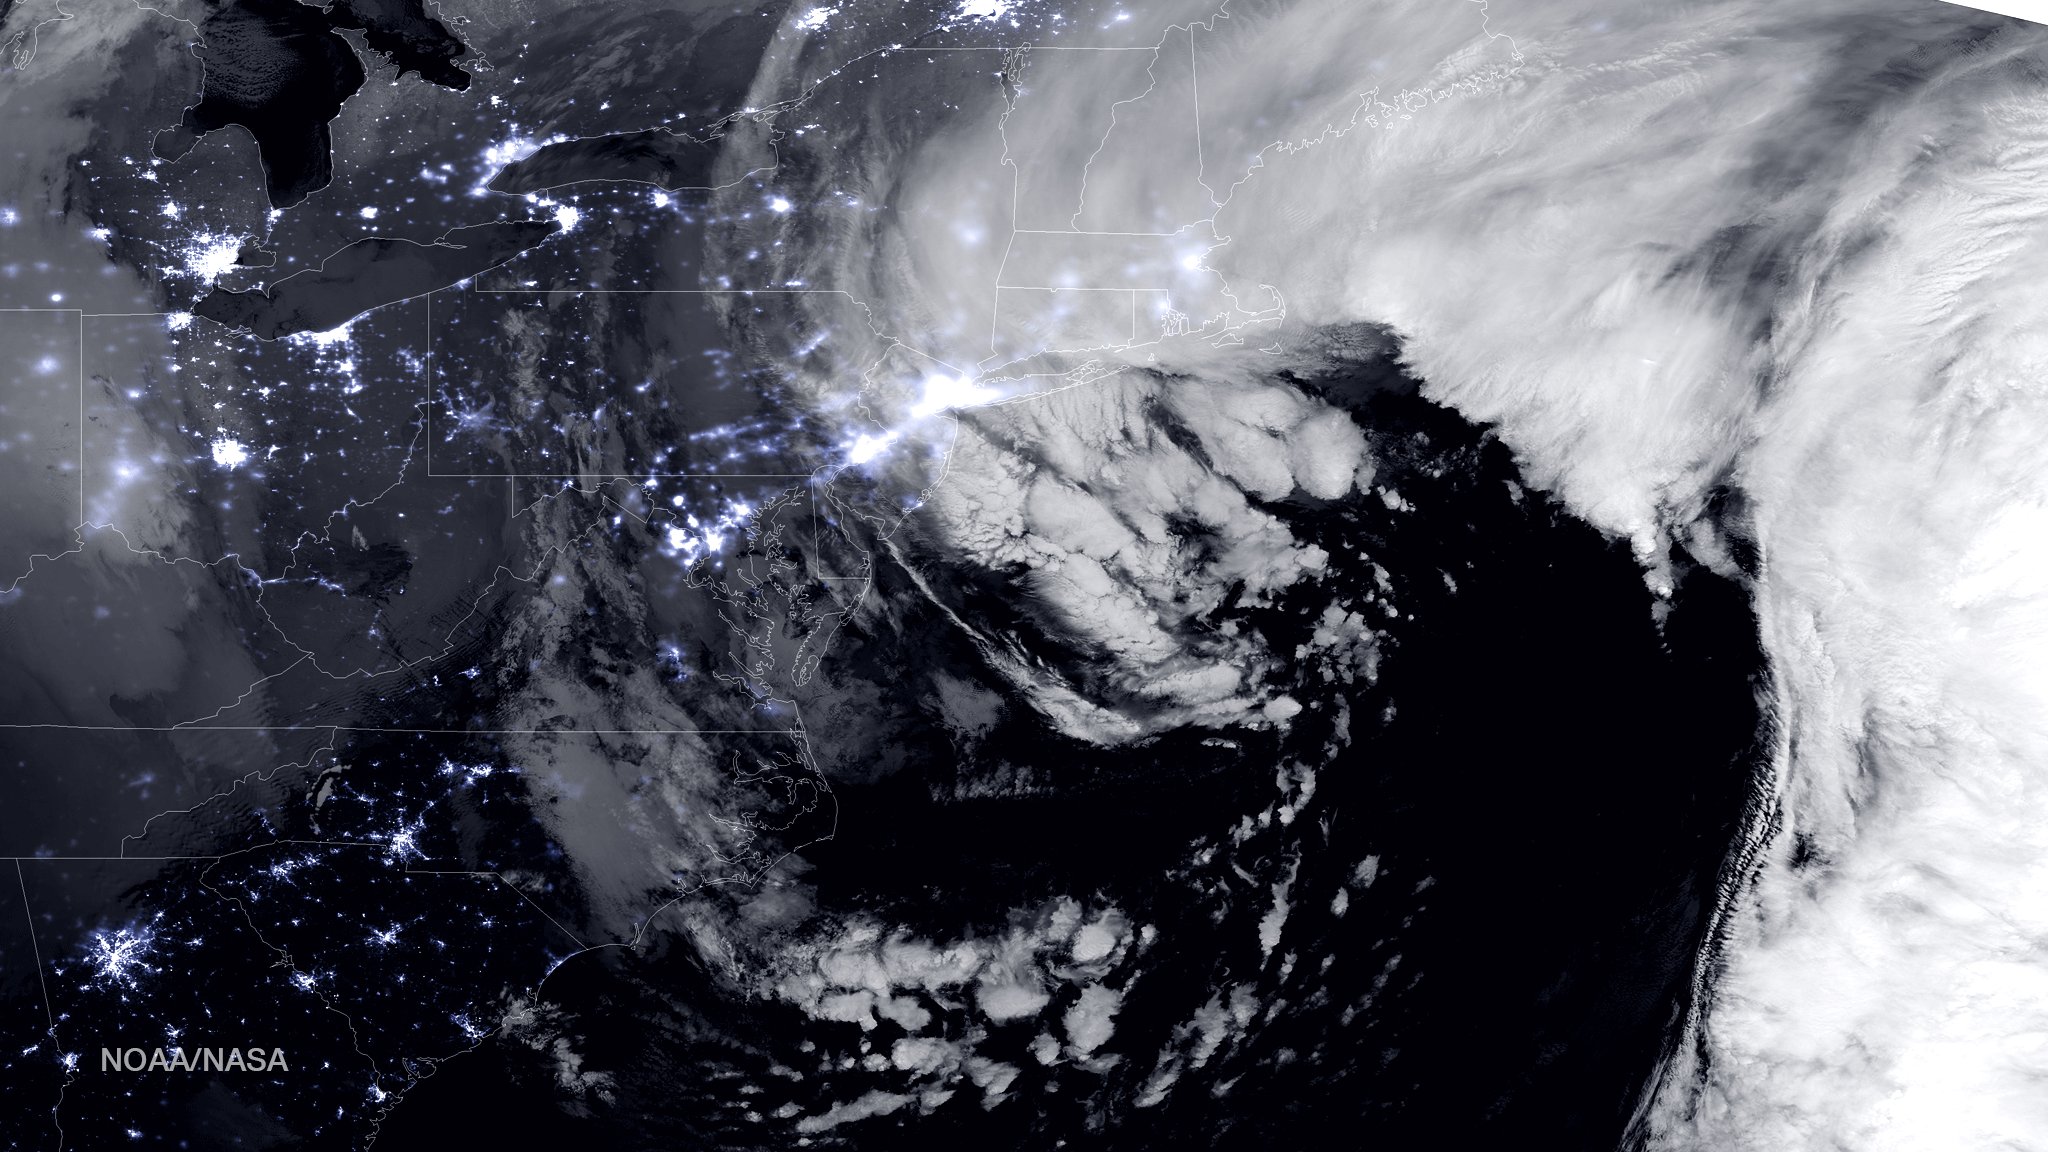 Infrared imagery from the NASA-NOAA's Suomi NPP satellite